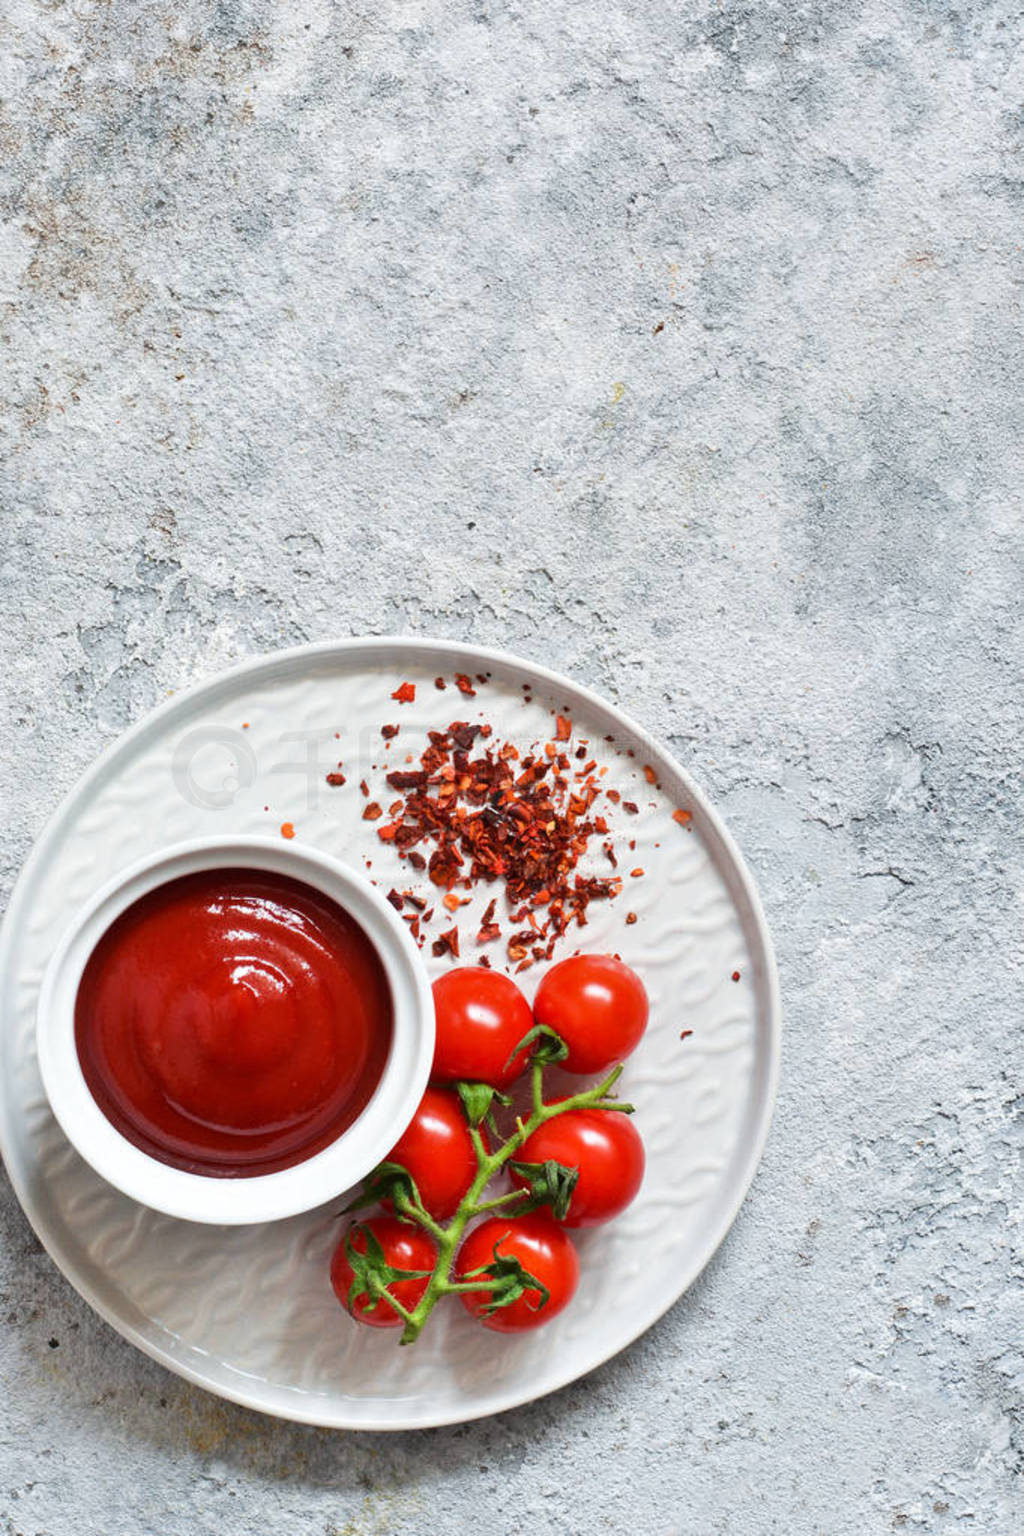 Classic tomato sauce with spices on a concrete background.